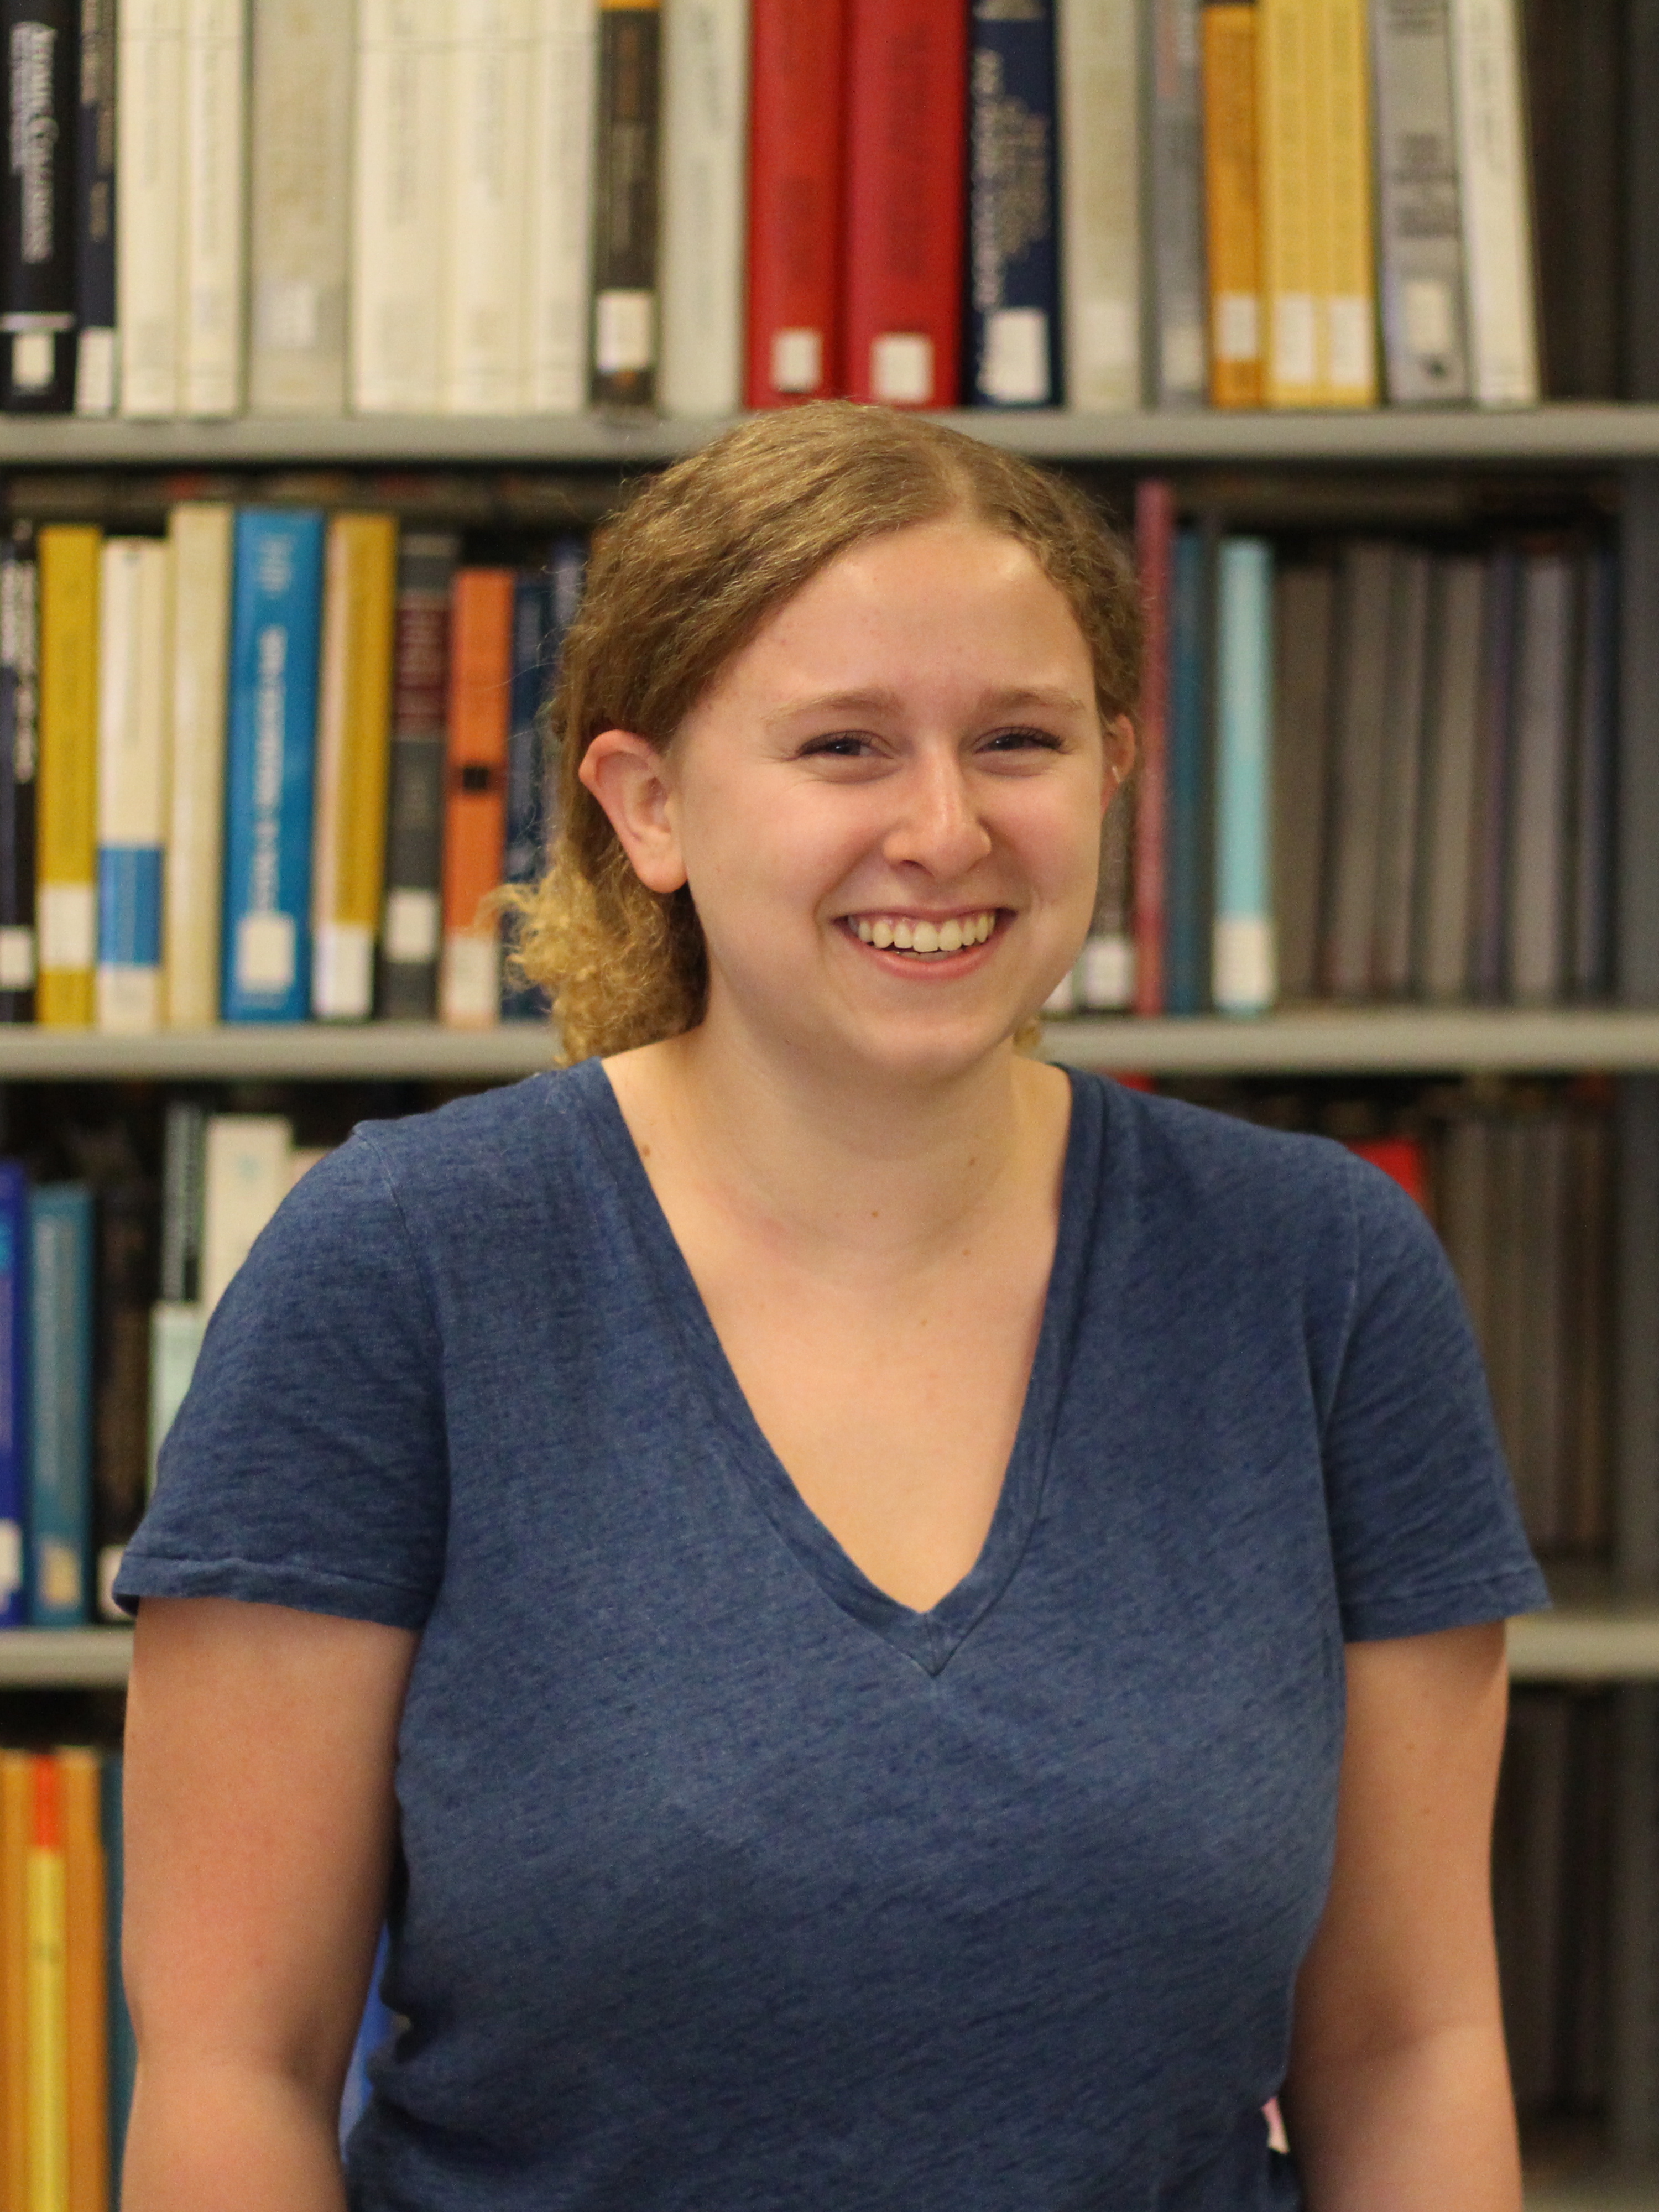 Adina is the Outreach Chair of SPS, majoring in Physics & Astronomy.